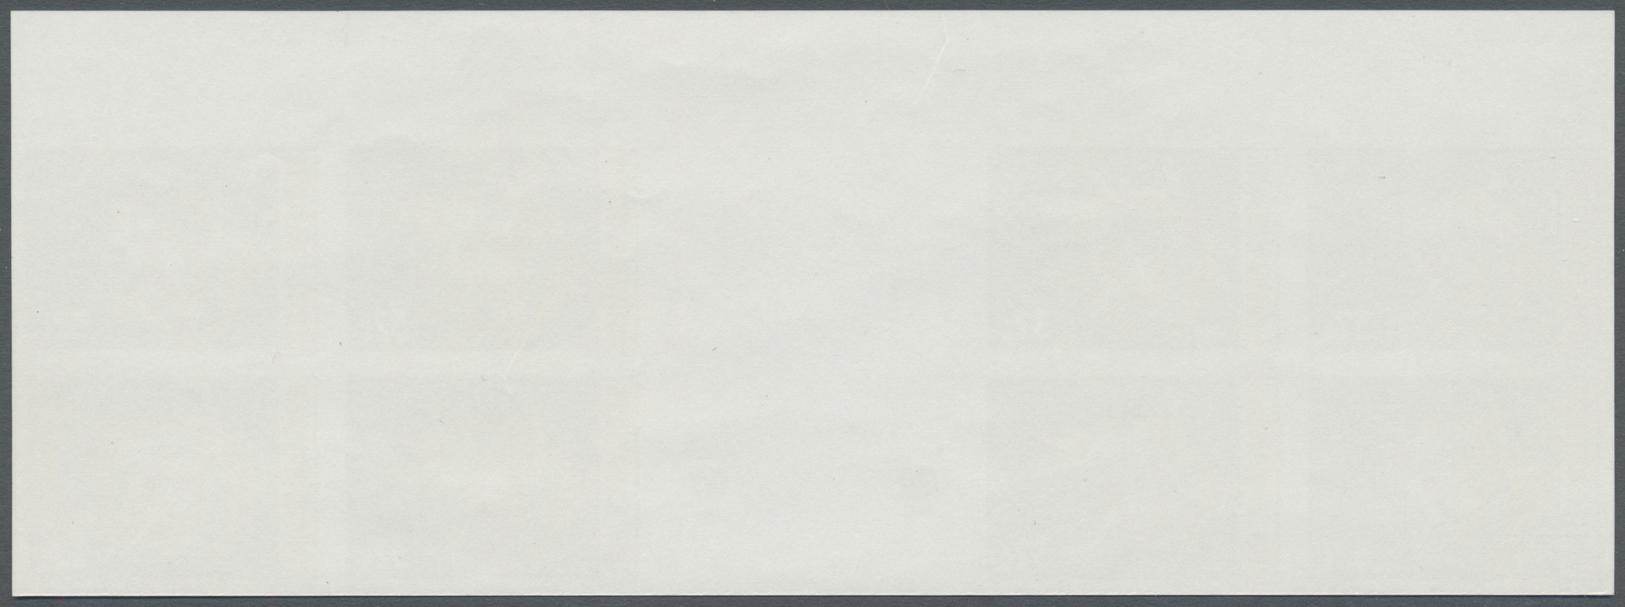 ** Thematik: Malerei, Maler / Painting, Painters: 1996, UN New York. Imperforate Horizontal Gutter Pair Of 2 Blocks Of 4 - Other & Unclassified